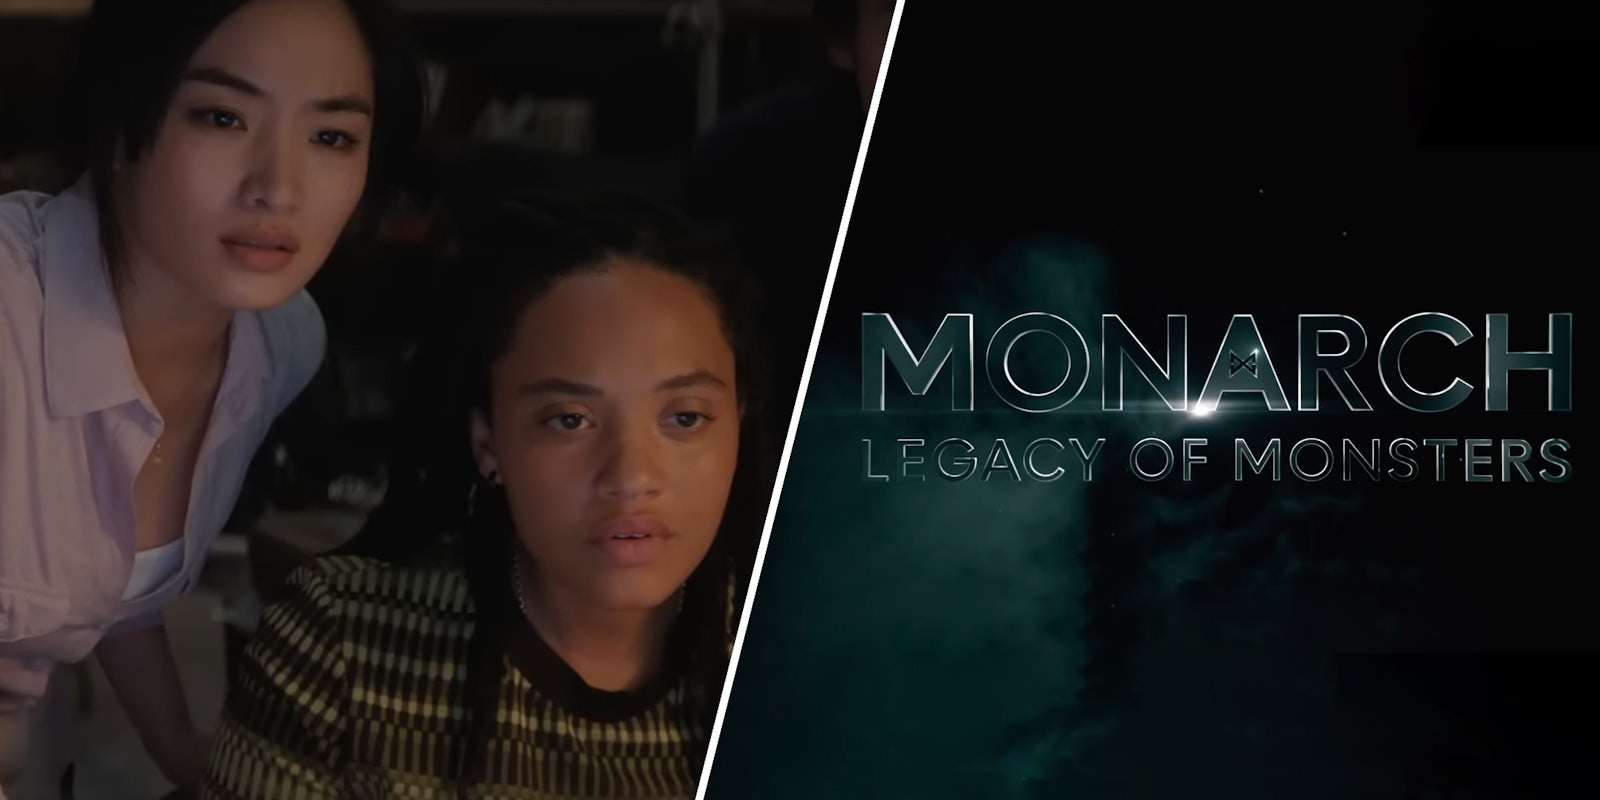 Legacy of Monsters a sci-fi bomb or a touching lesbian love story?